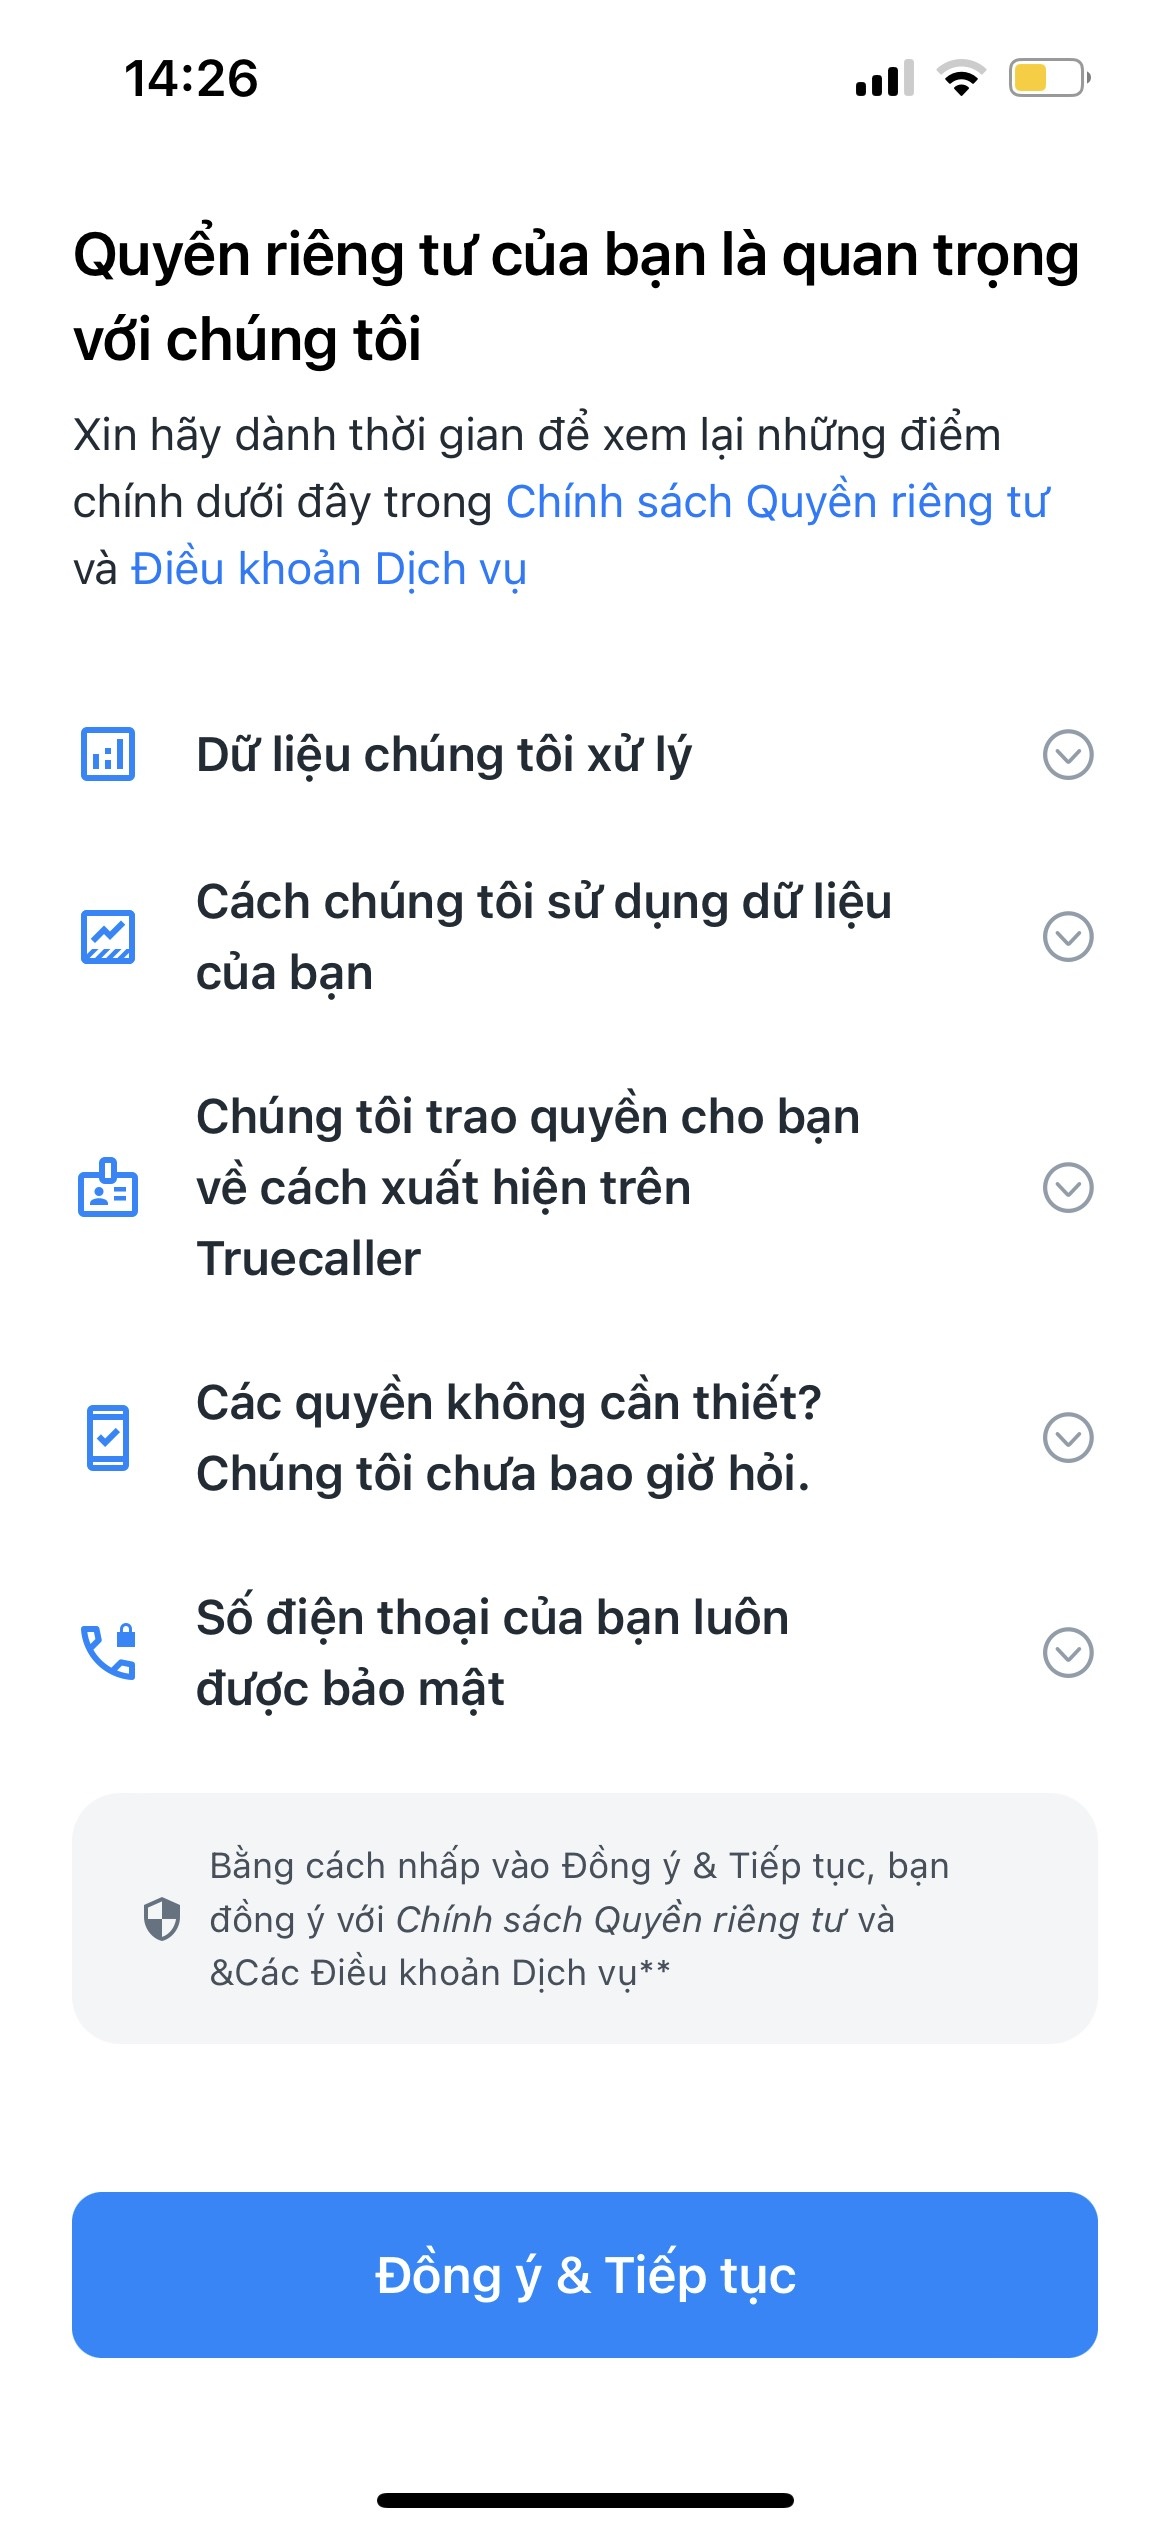 Chan cuoc goi spam anh 5